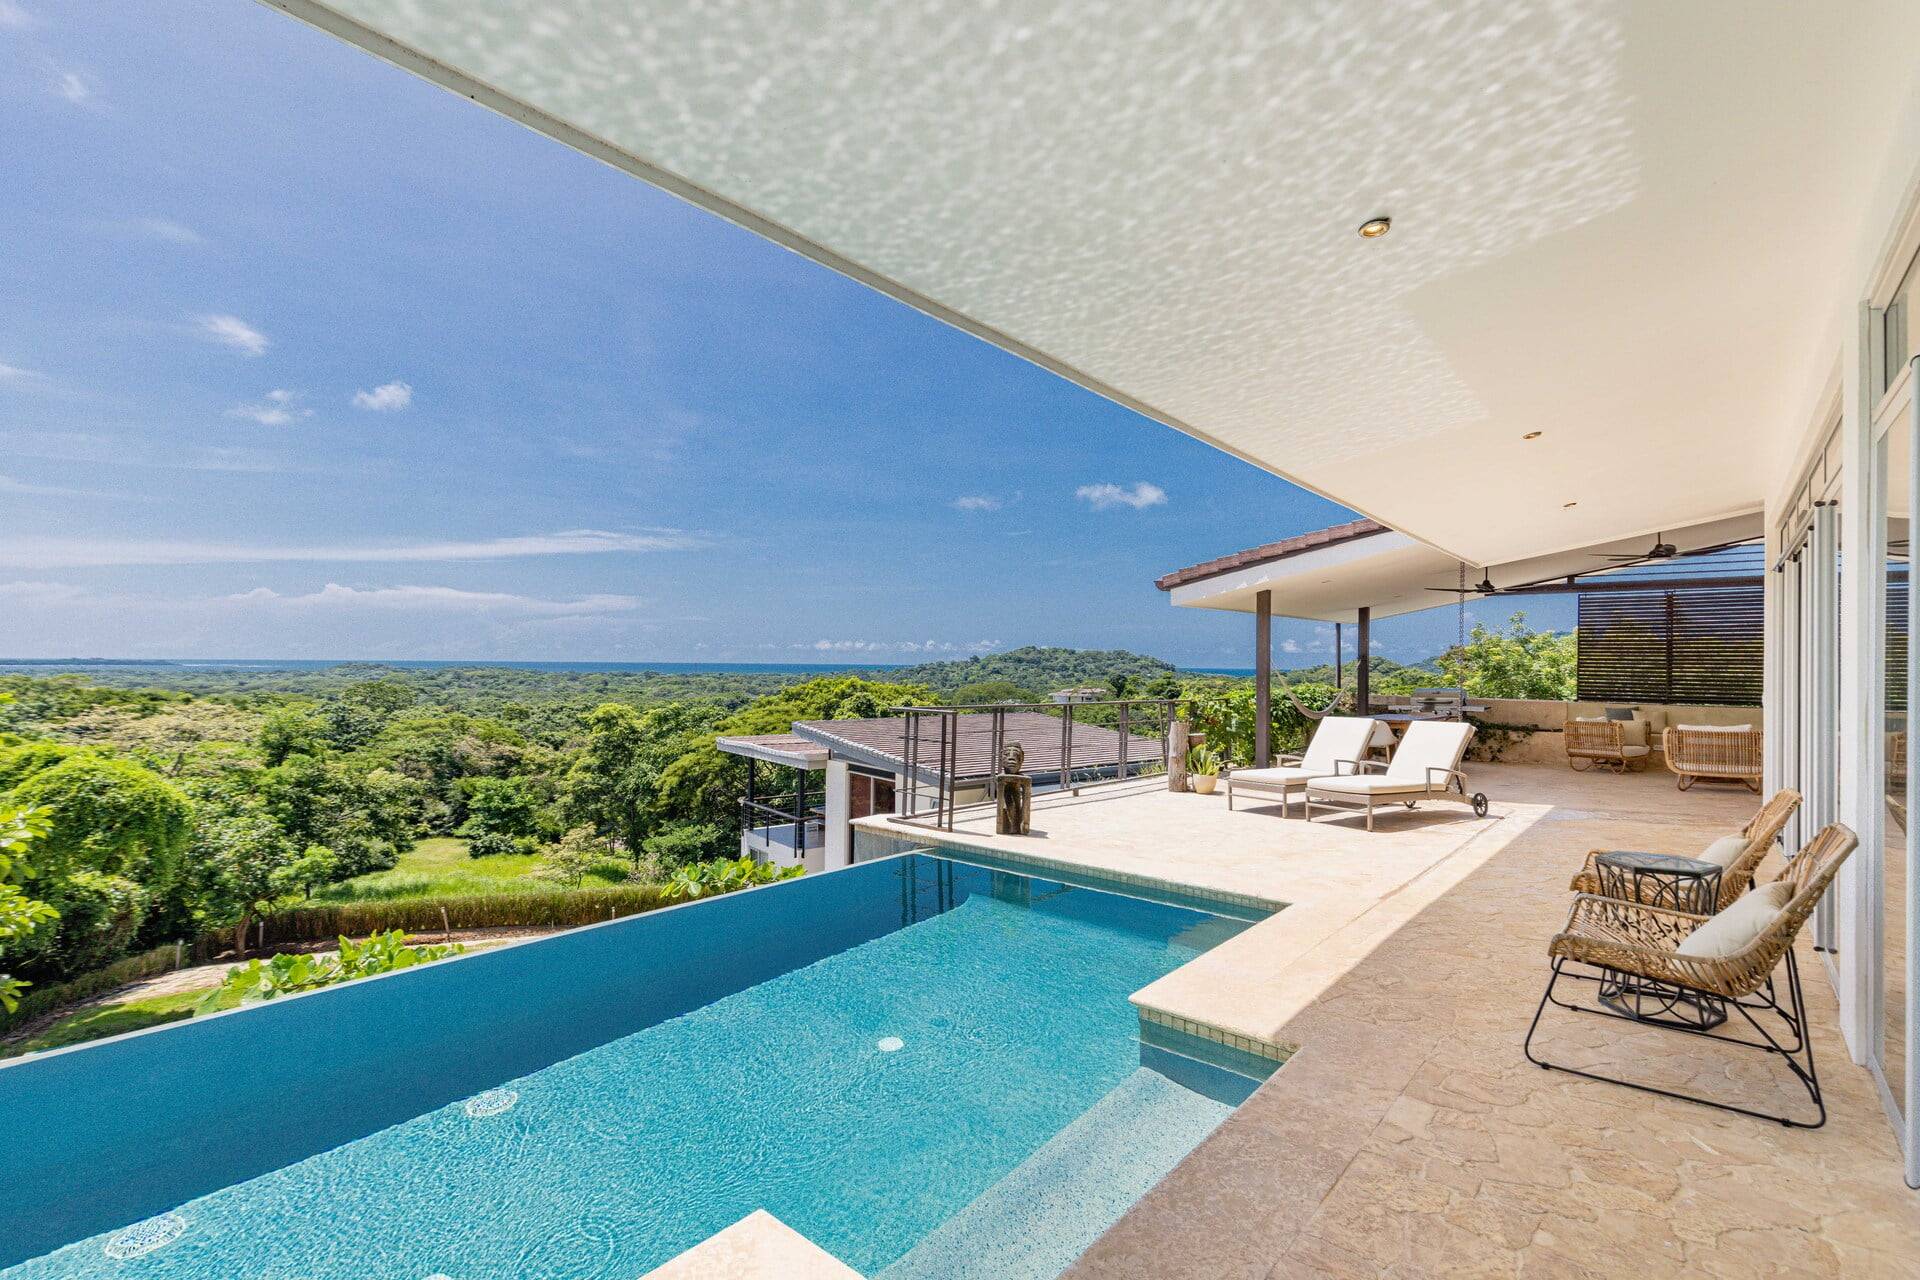 Casa Sunset affordable luxury homes in Costa Rica